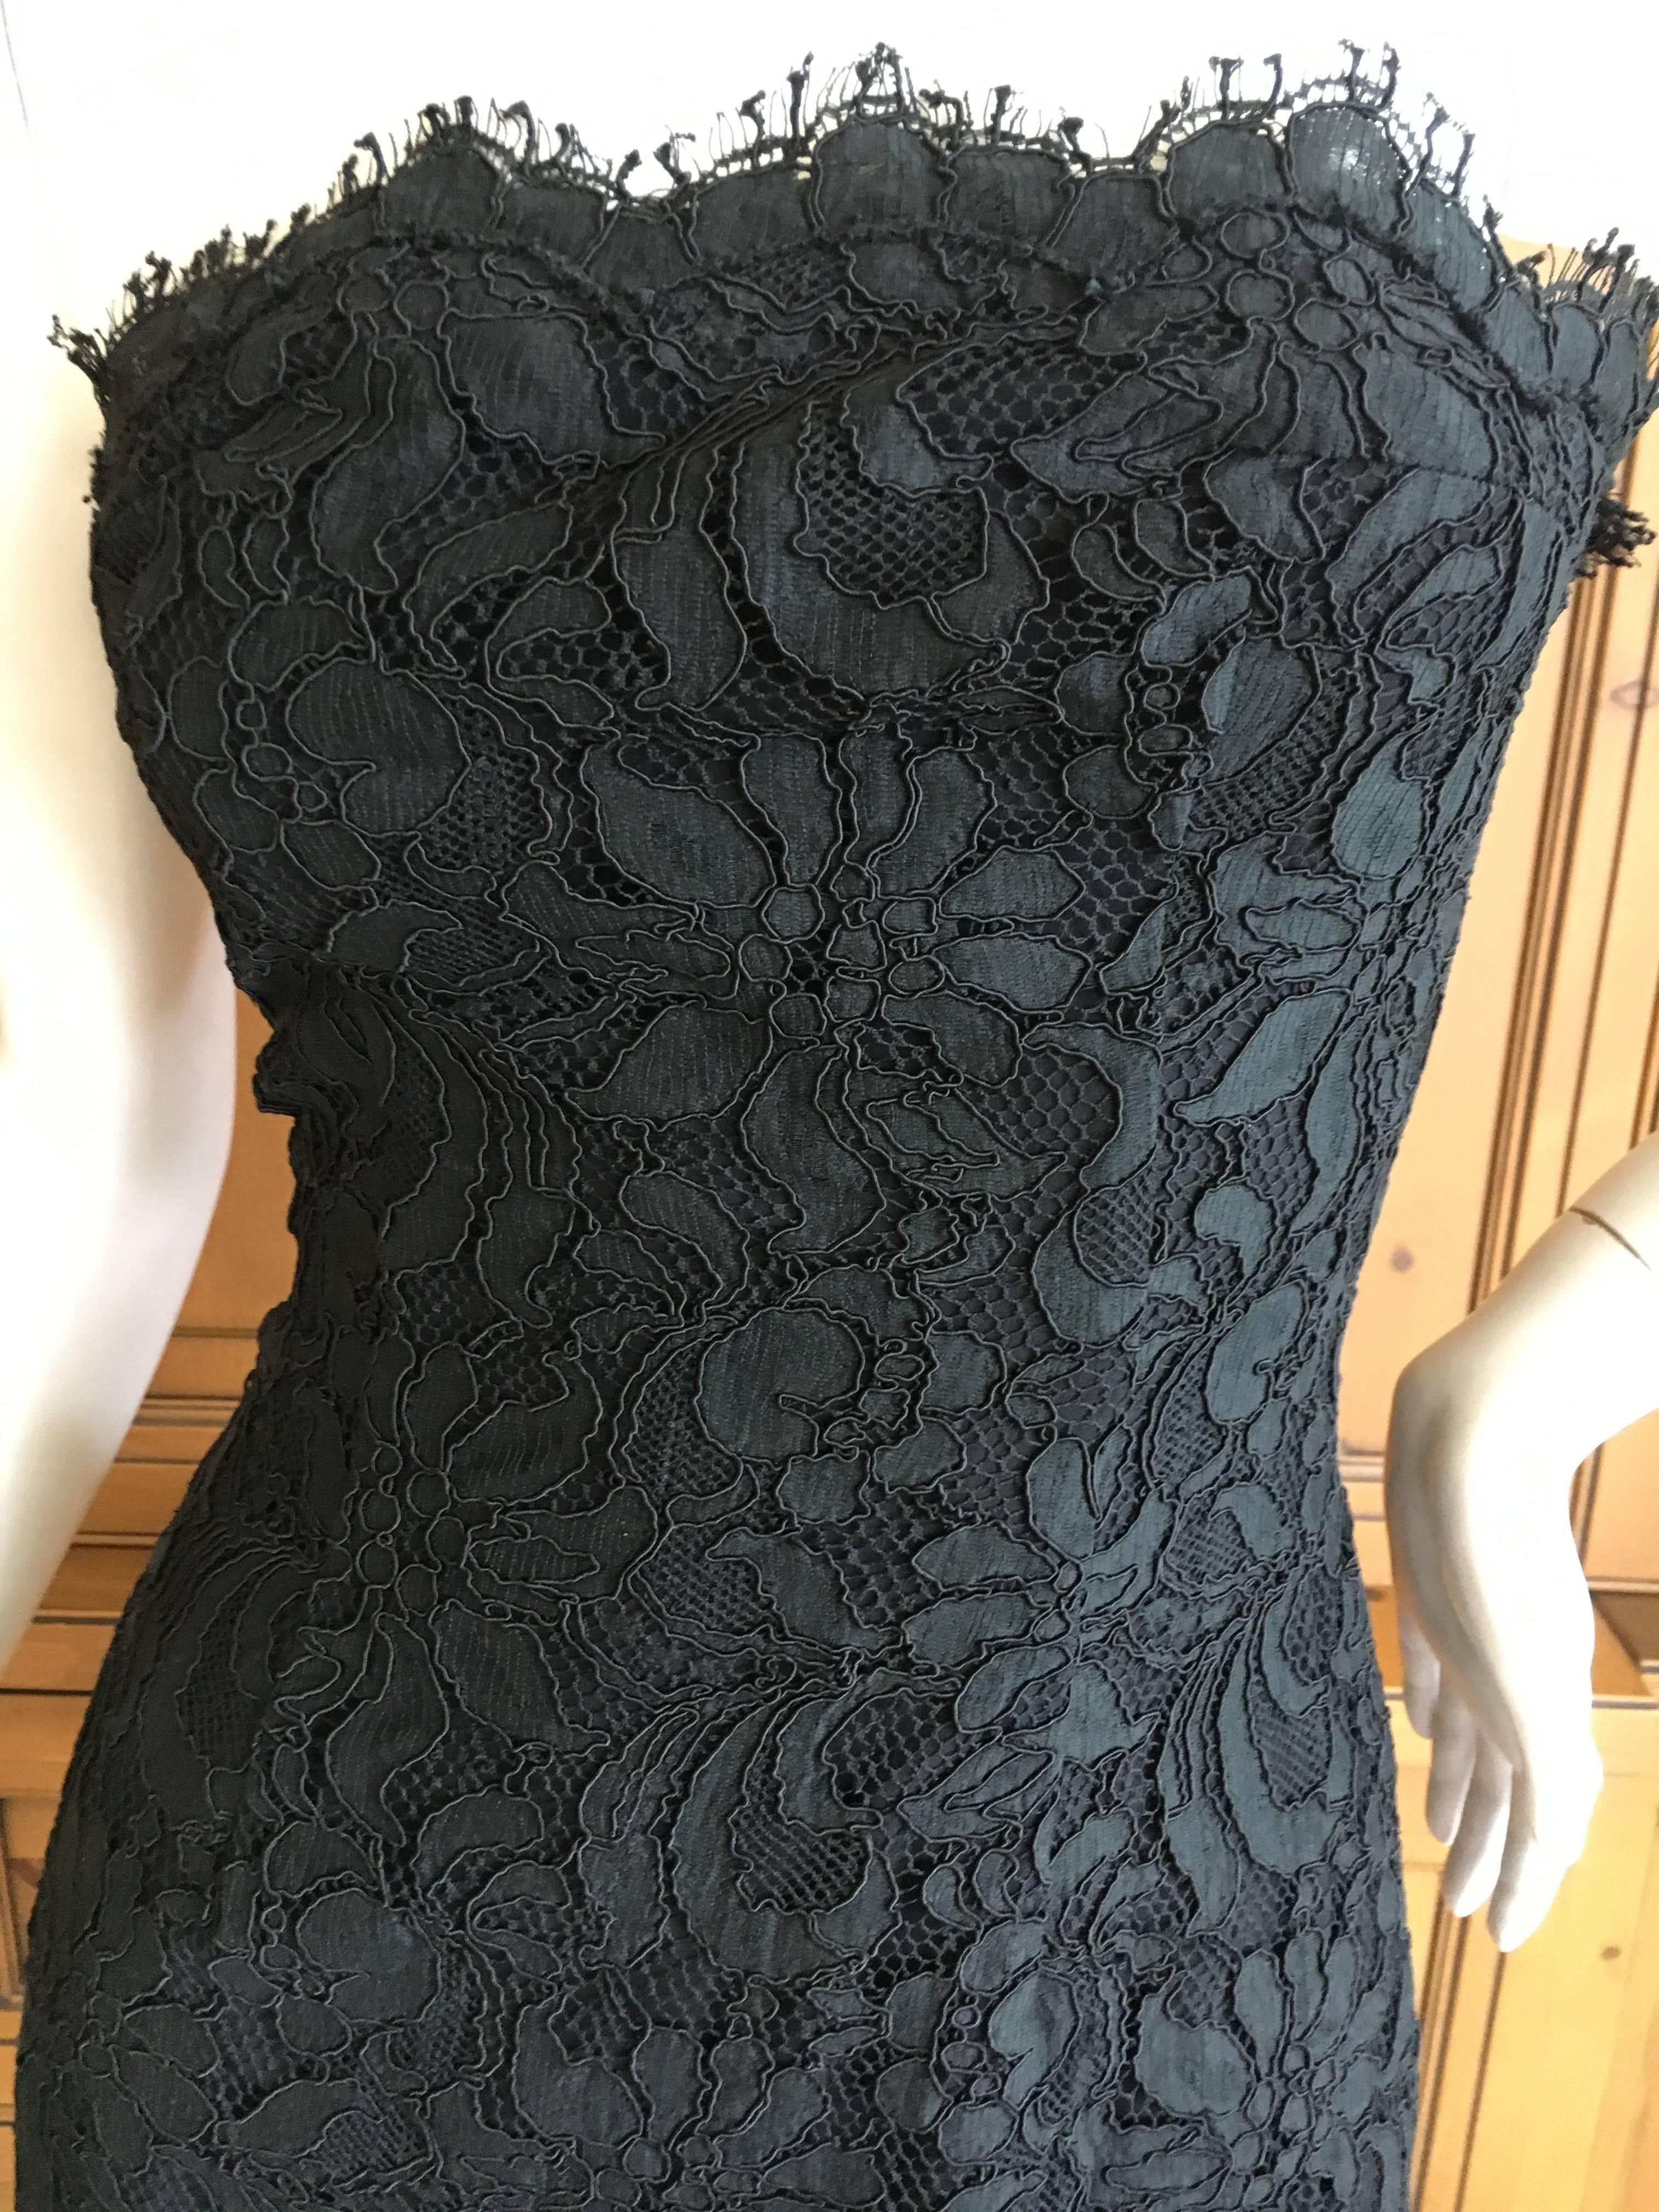 Exquisite Christian Lacroix Black Lace Strapless Mini Dress.
Lacroix was a master of fashioning lace, a legacy of his Arles upbringing , and this is a wonderful example.
Simple and sweet
Marked size 38 but it is tiny
Bust 34